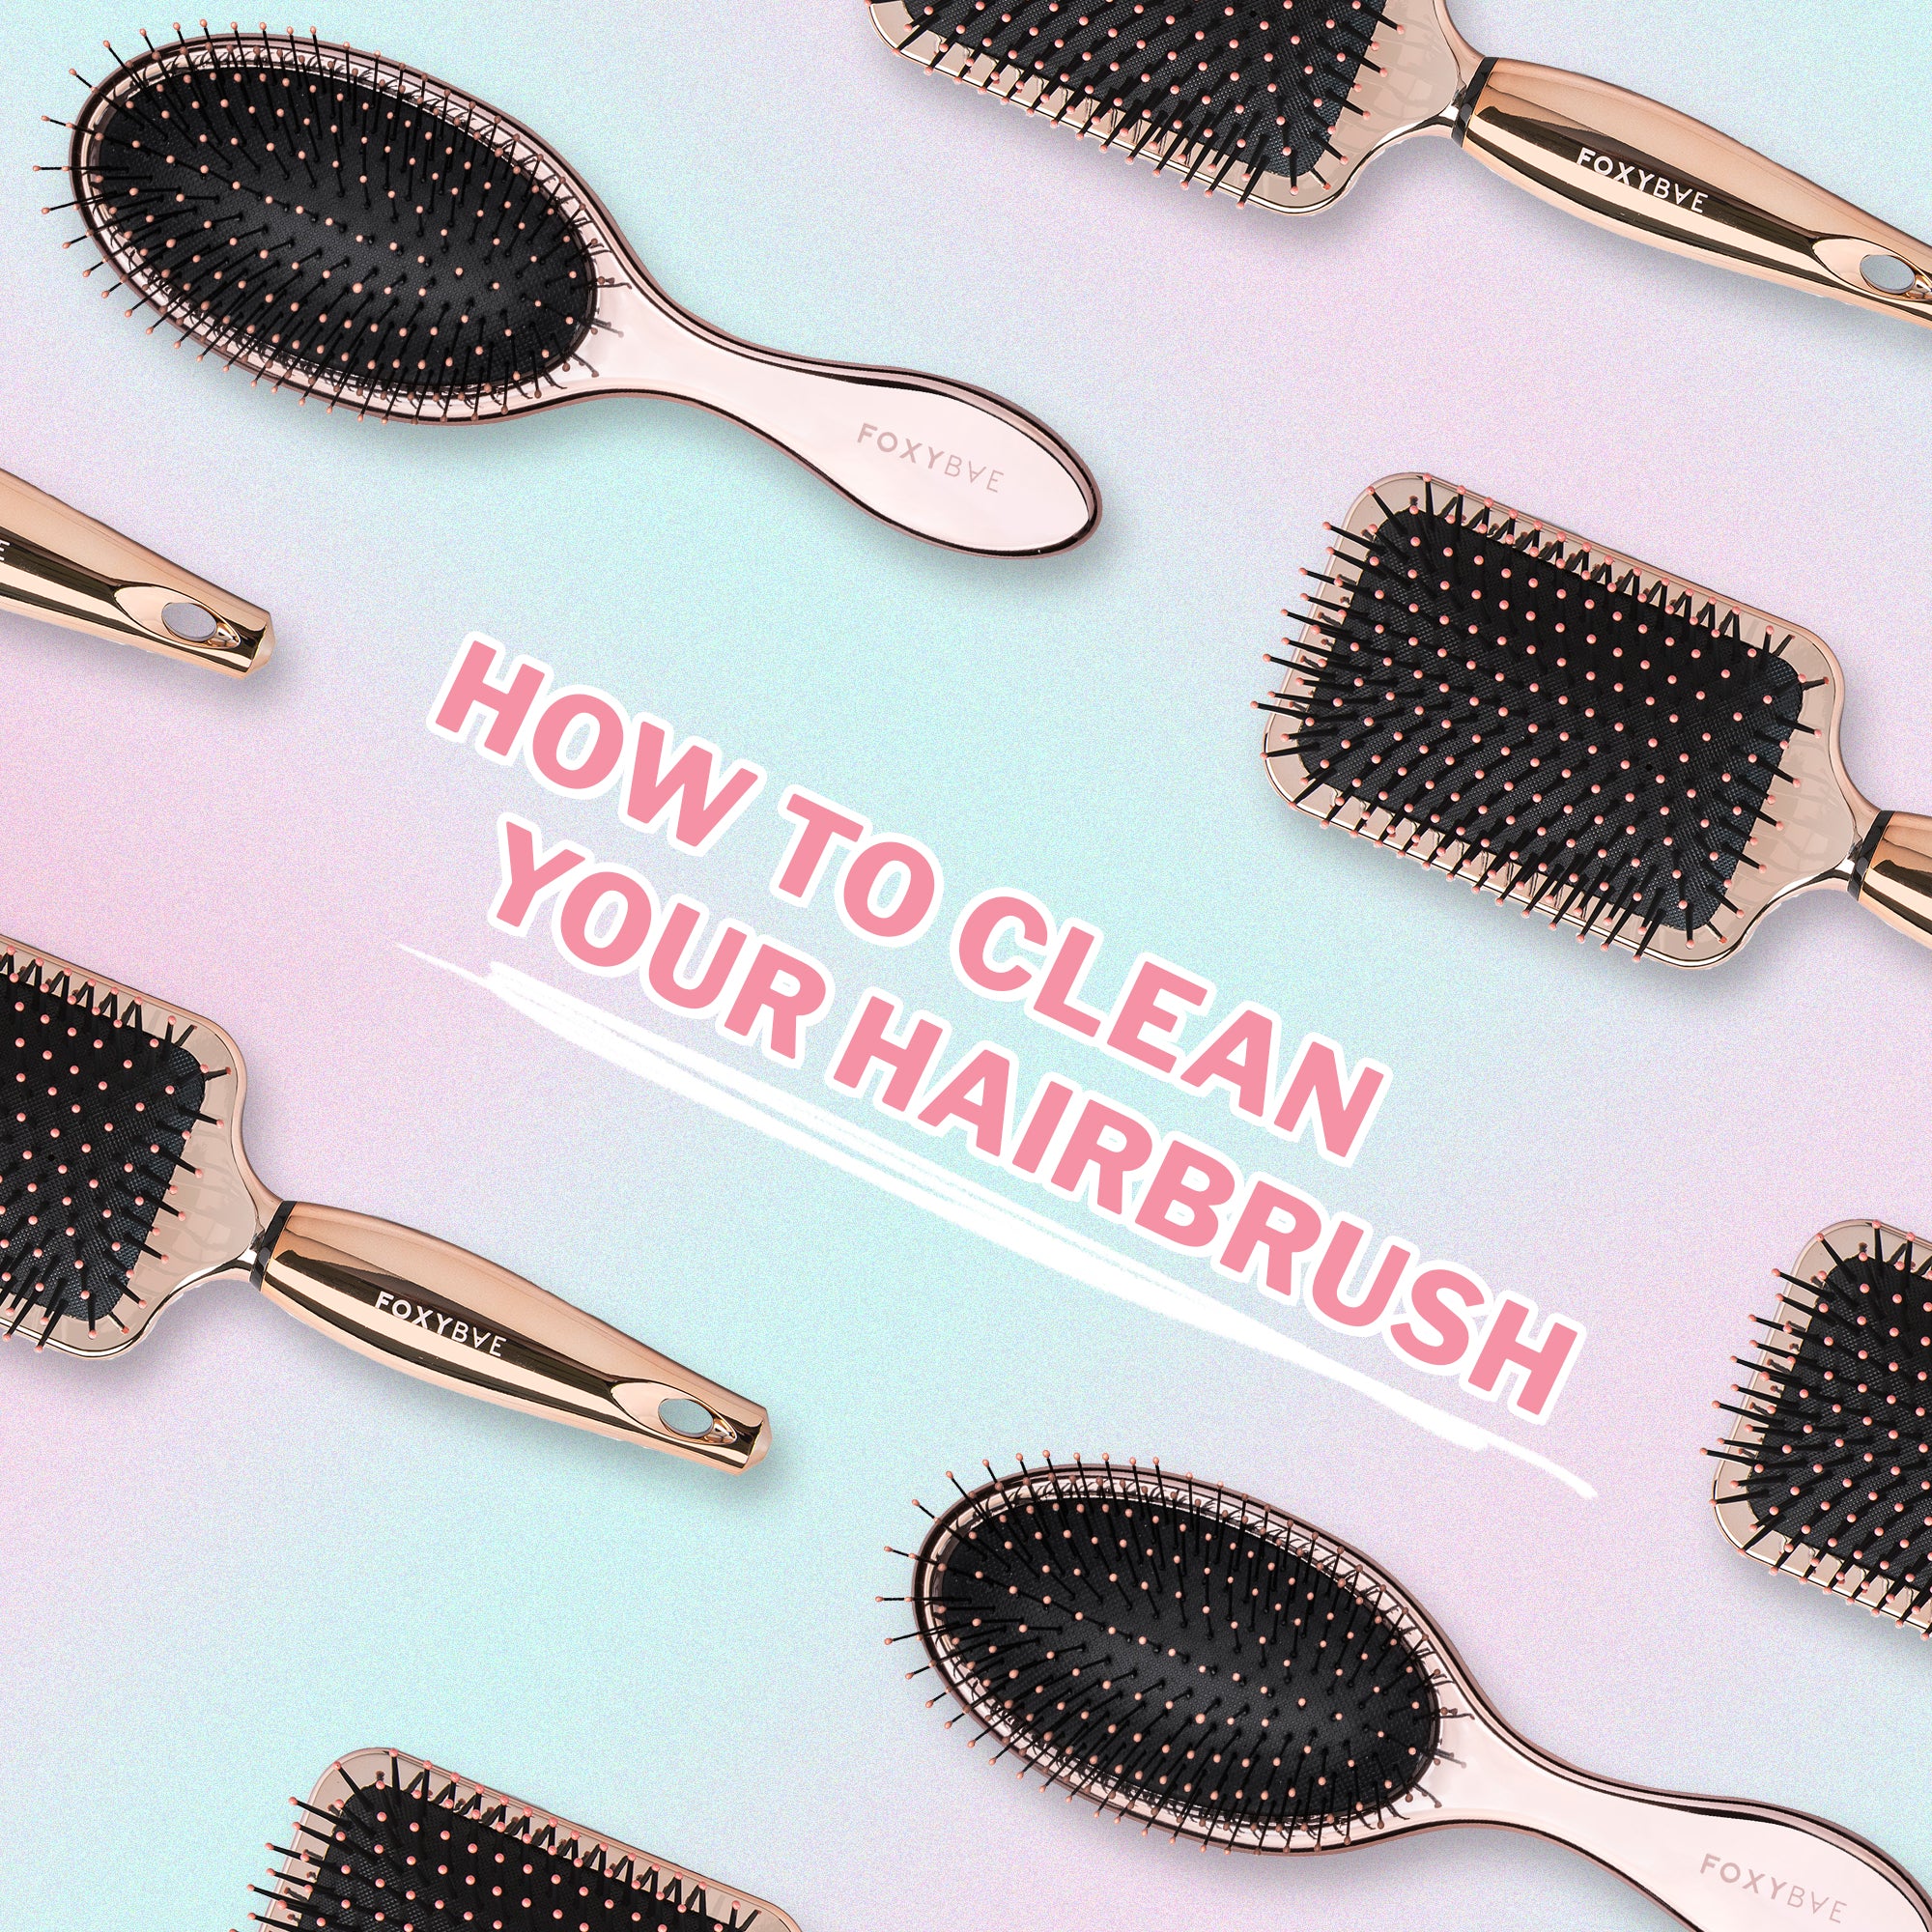 how to clean your hairbrush